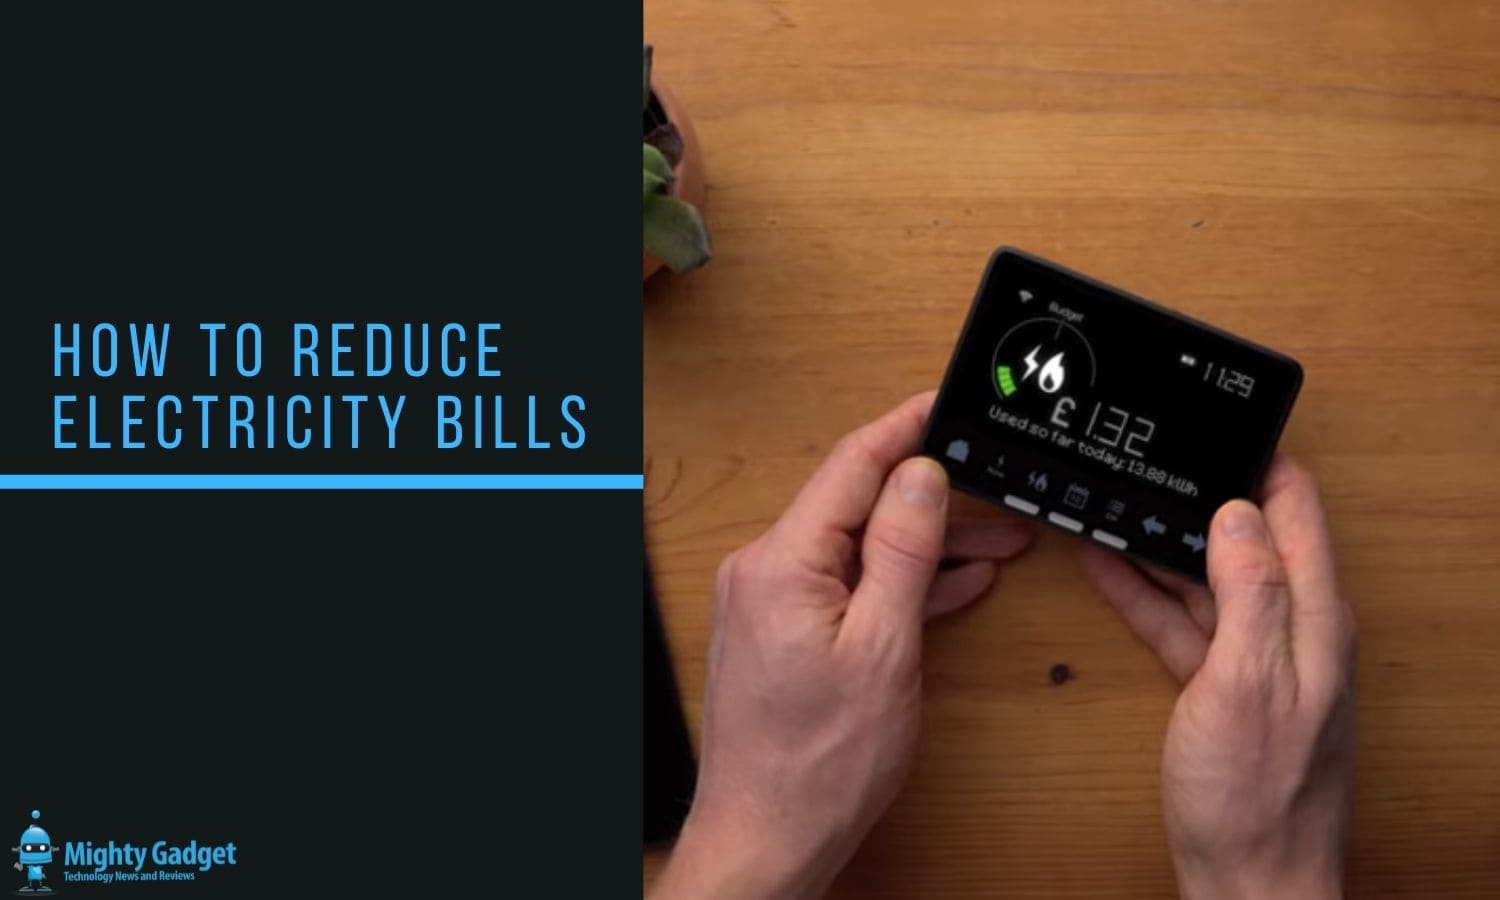 How to Reduce Electricity Bills: Identifying power-hungry devices & limiting usage